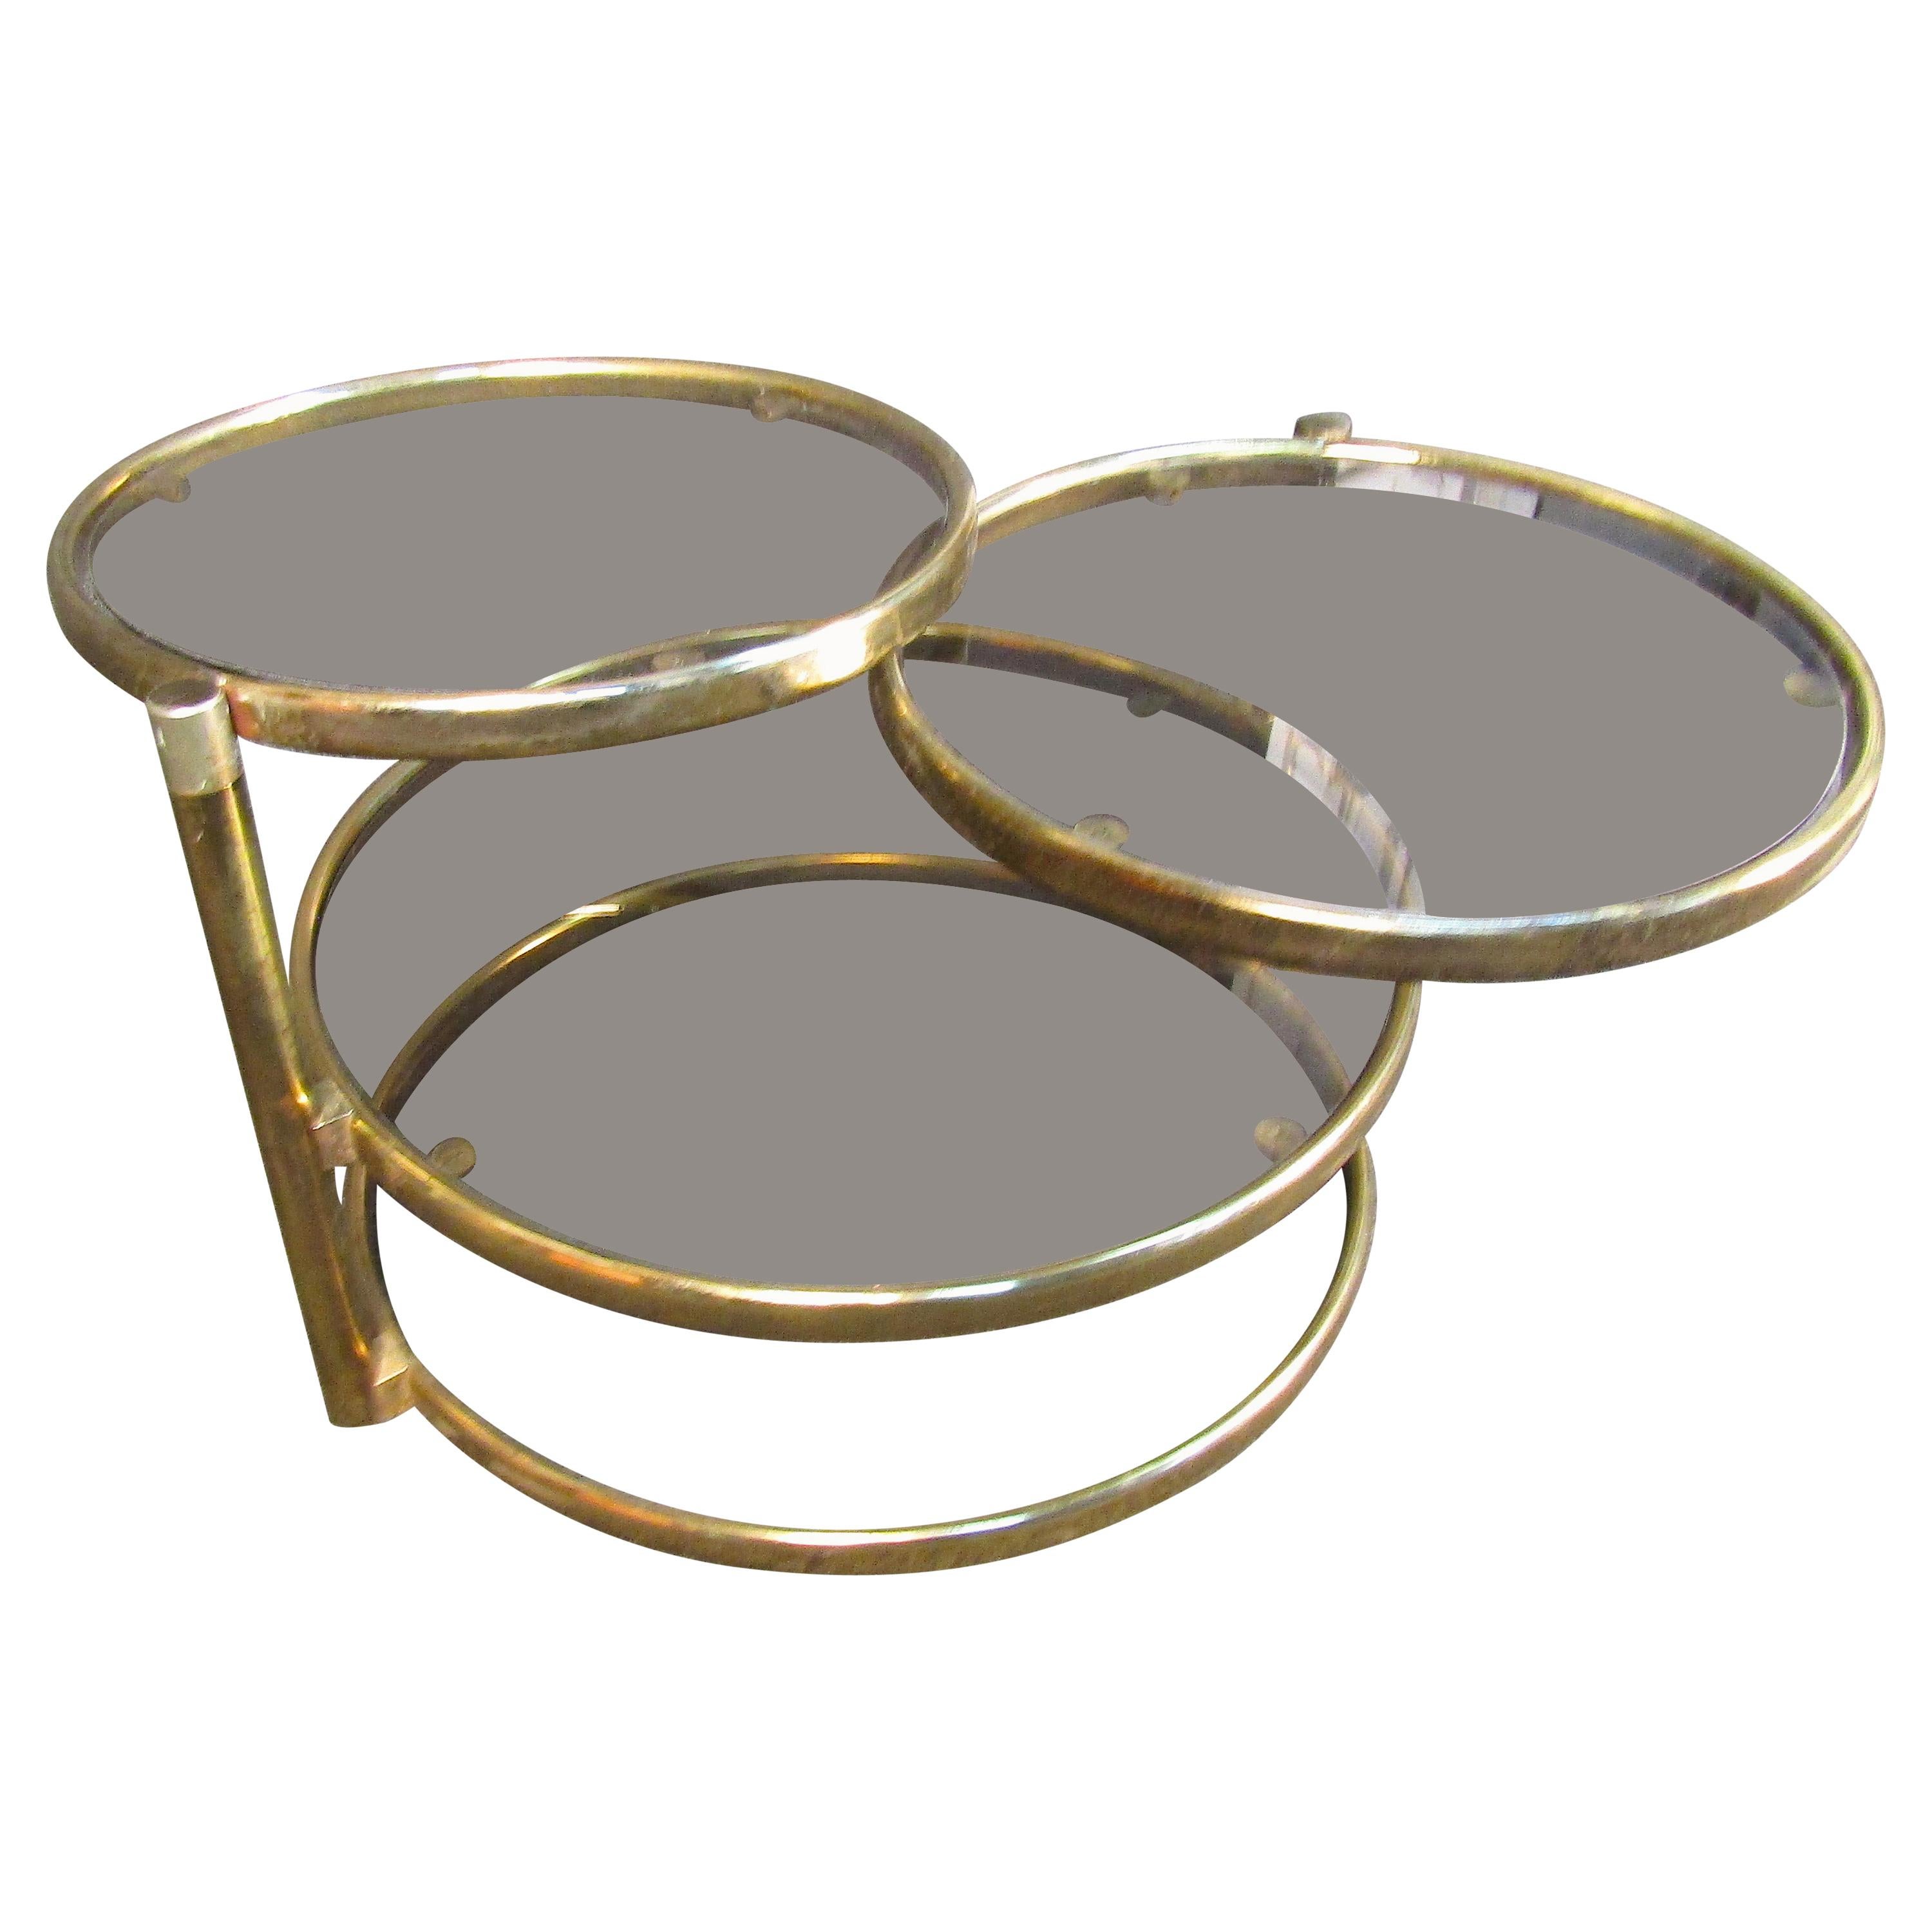 Unique Mid-Century Modern Adjustable Brass Hoop Table For Sale